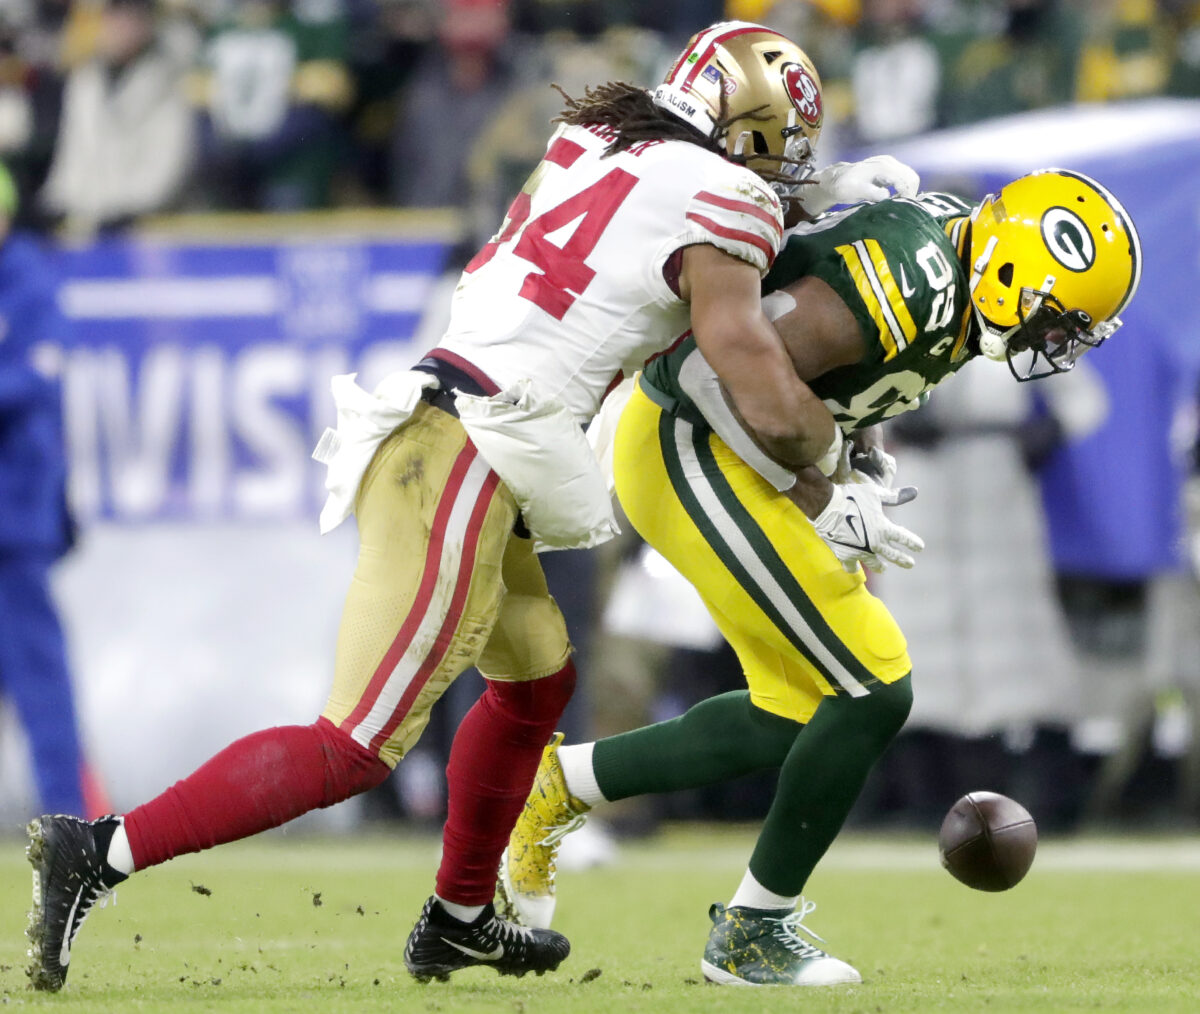 NFL playoff schedule: 49ers vs. Packers date and kickoff time set